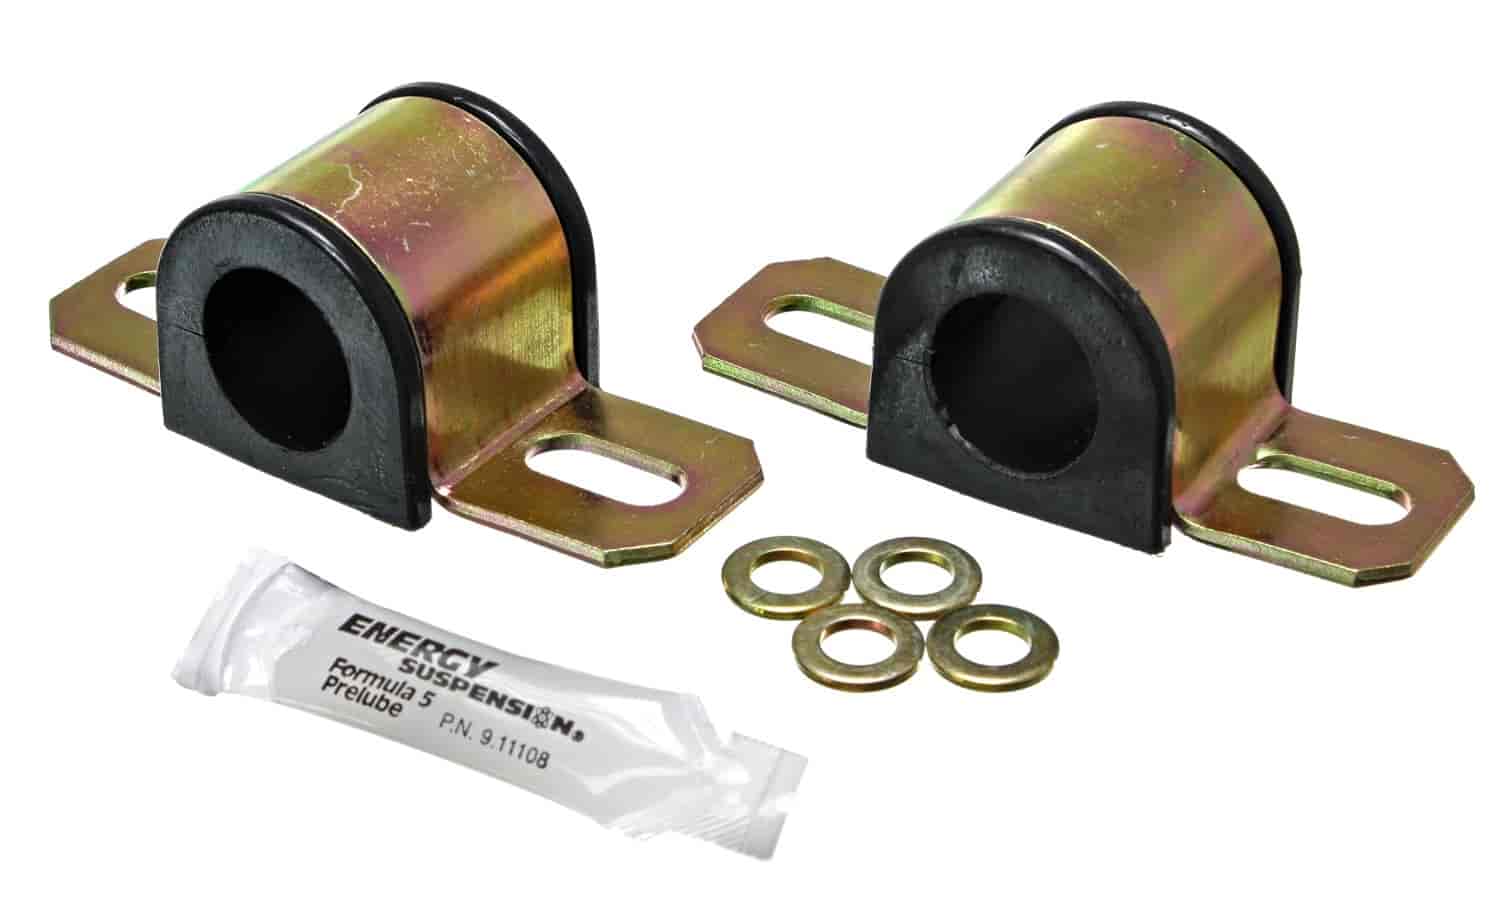 Universal Non-Greaseable Sway Bar Bushings 1-5/16" or 33mm